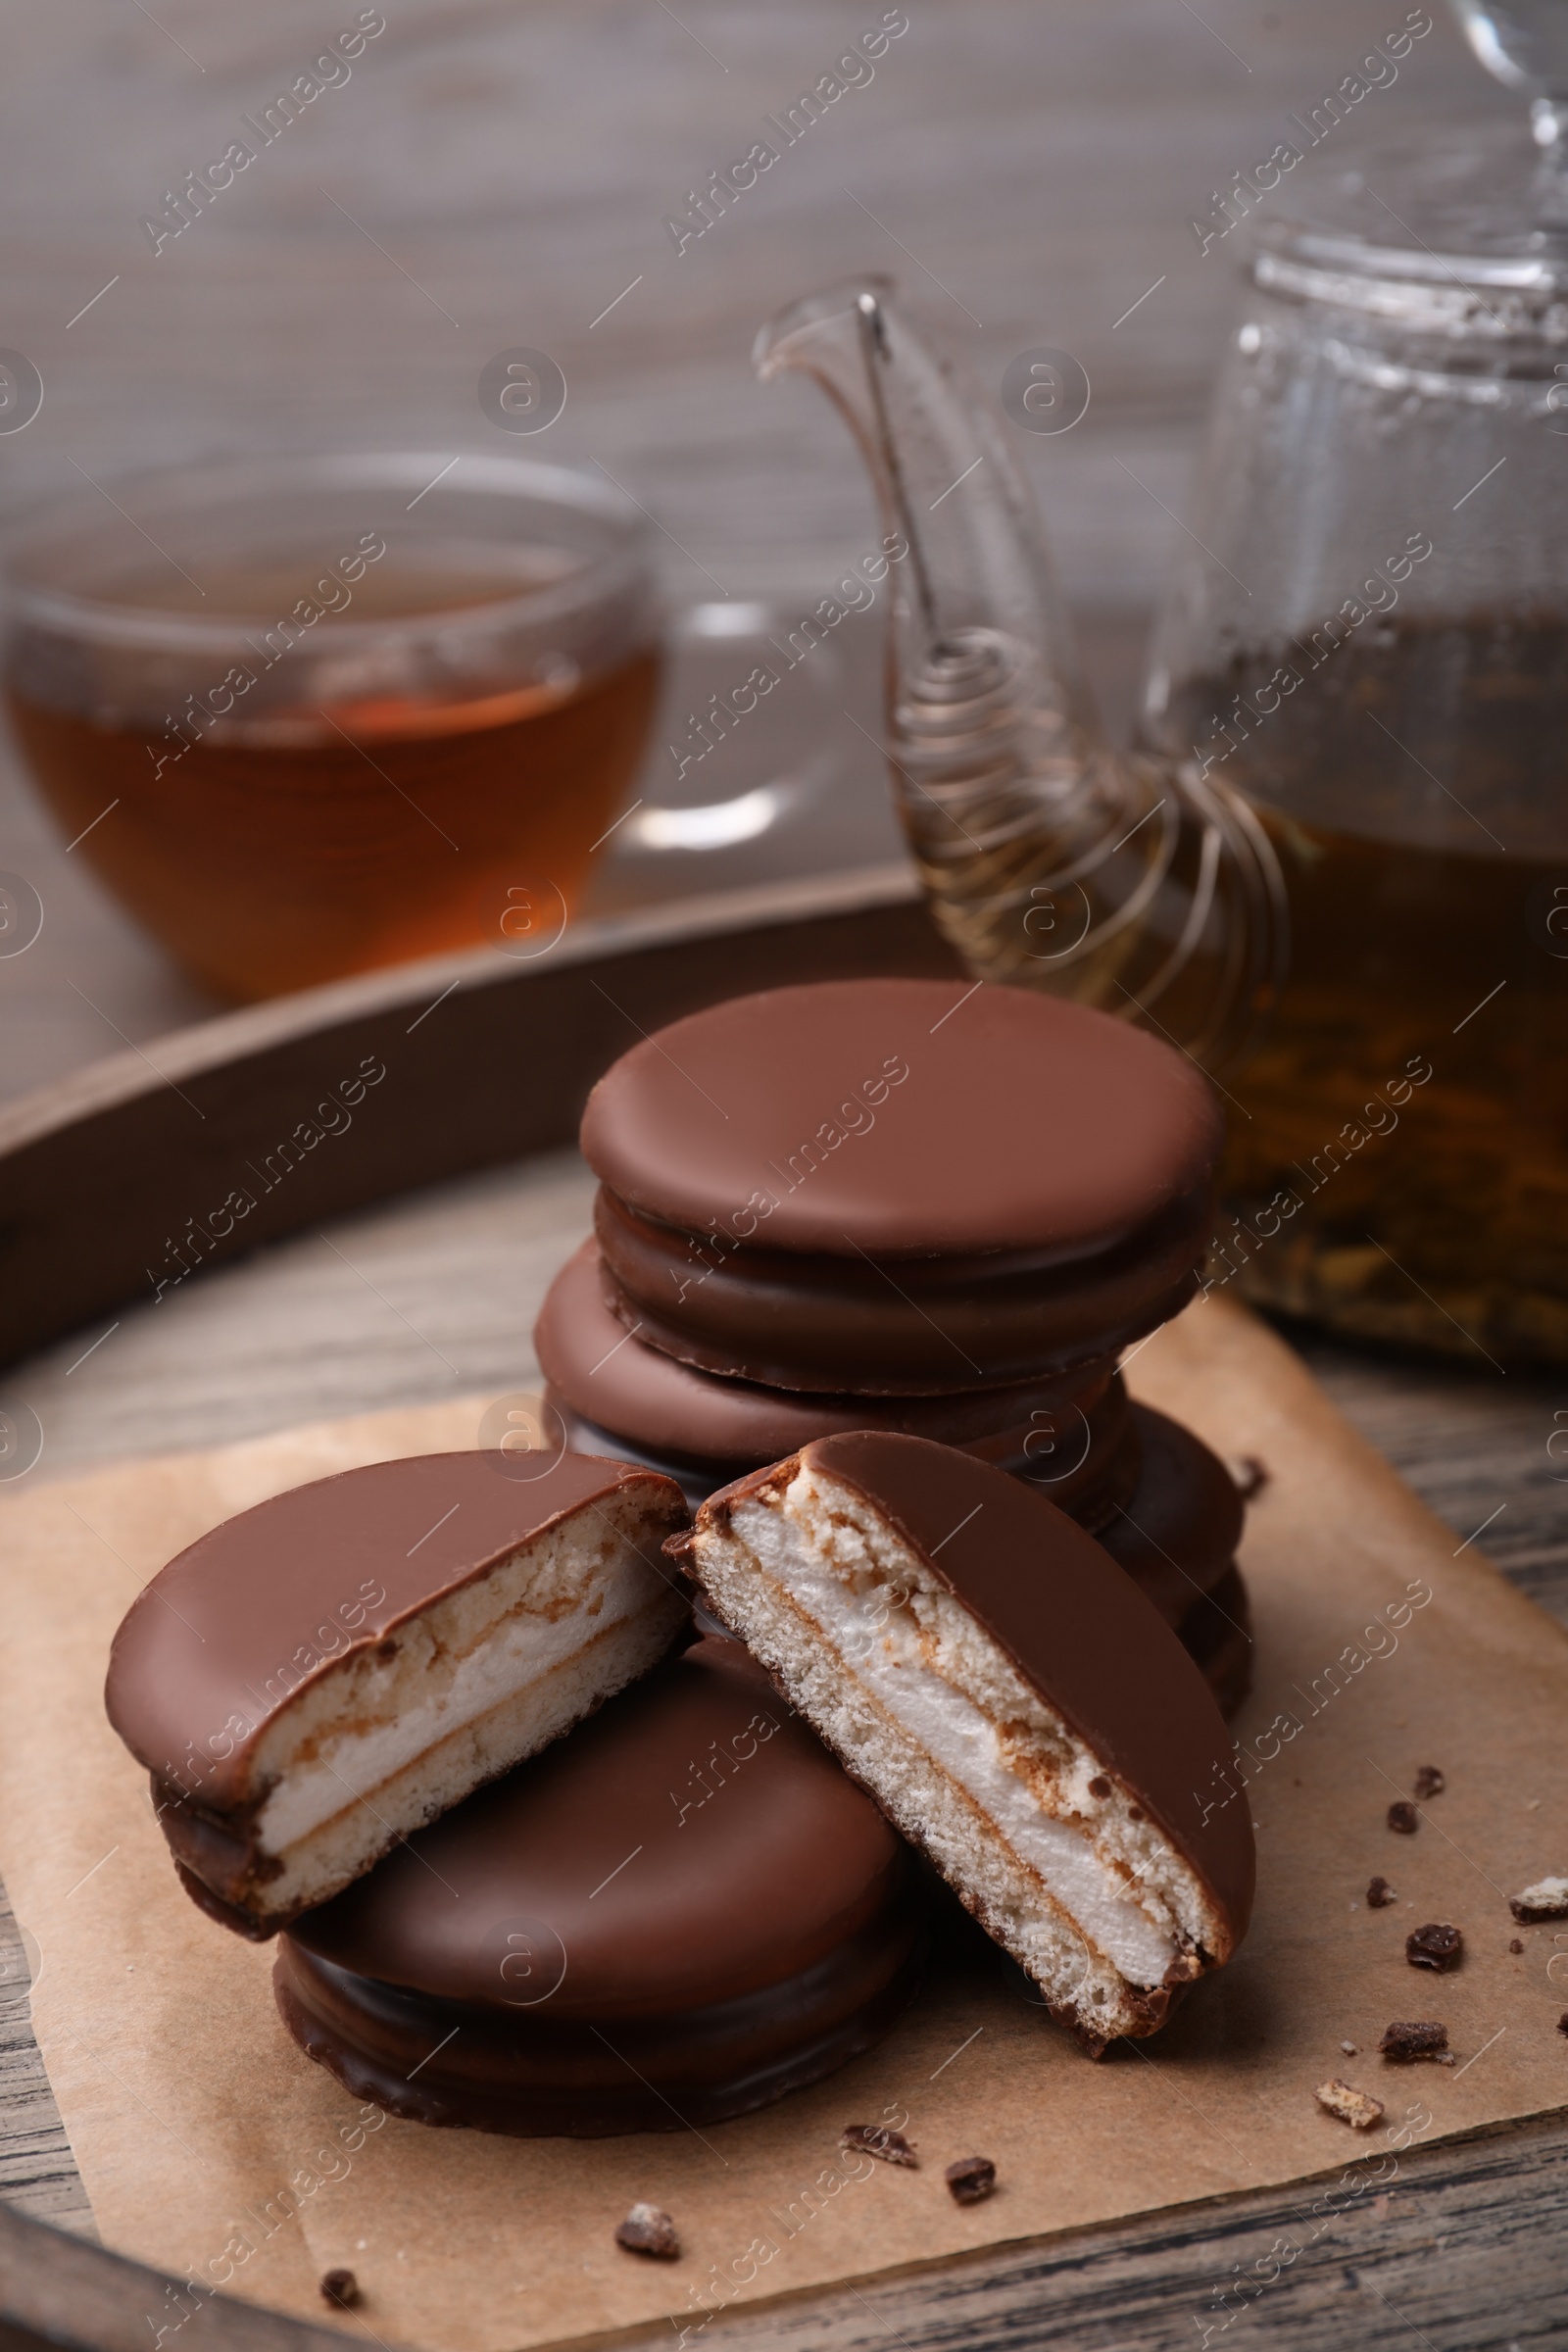 Photo of Tasty choco pies and tea on wooden tray